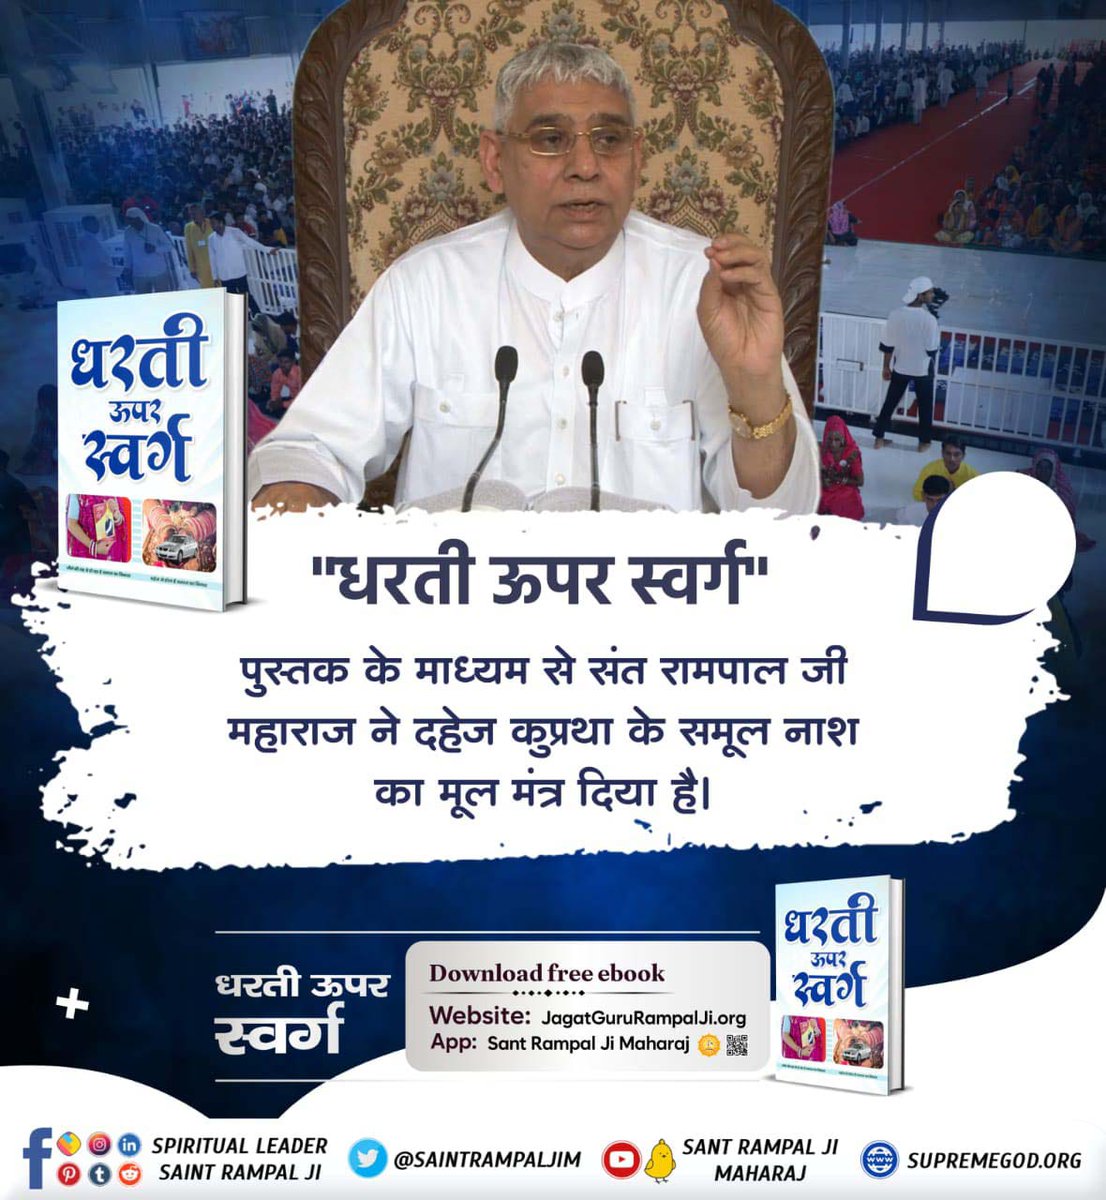 #धरती_को_स्वर्ग_बनाना_है After hearing the thoughts of Sant Rampal Ji Maharaj, no one can ever consider either giving or taking dowry, the logic is so hard-hitting. Sant Rampal Ji Maharaj